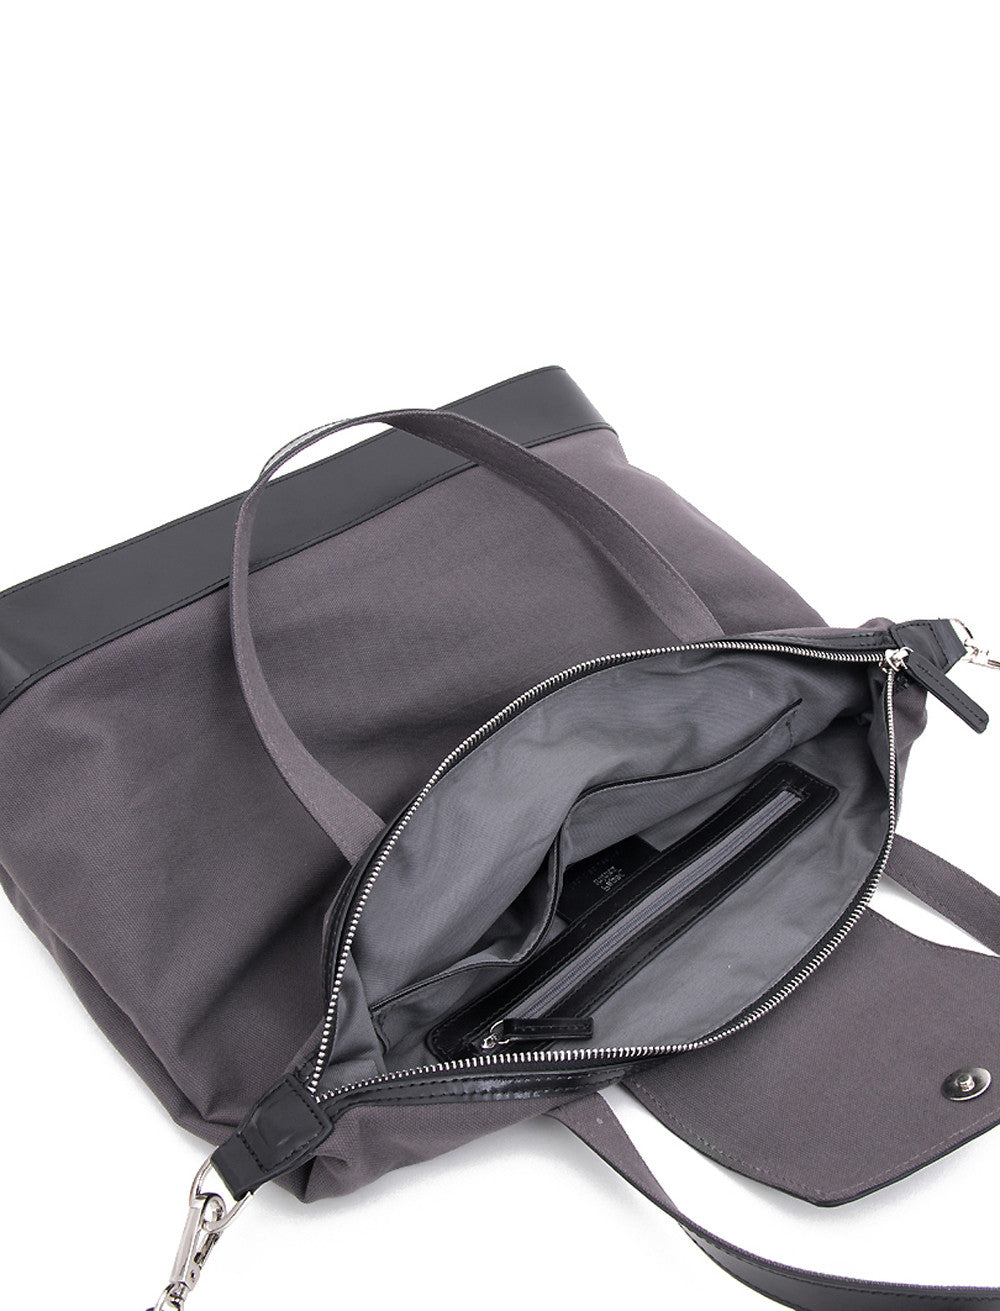 Paperthinks Canvas Zip Top Bag with Recycled Leather Accents - Charcoal - Paperthinks.us